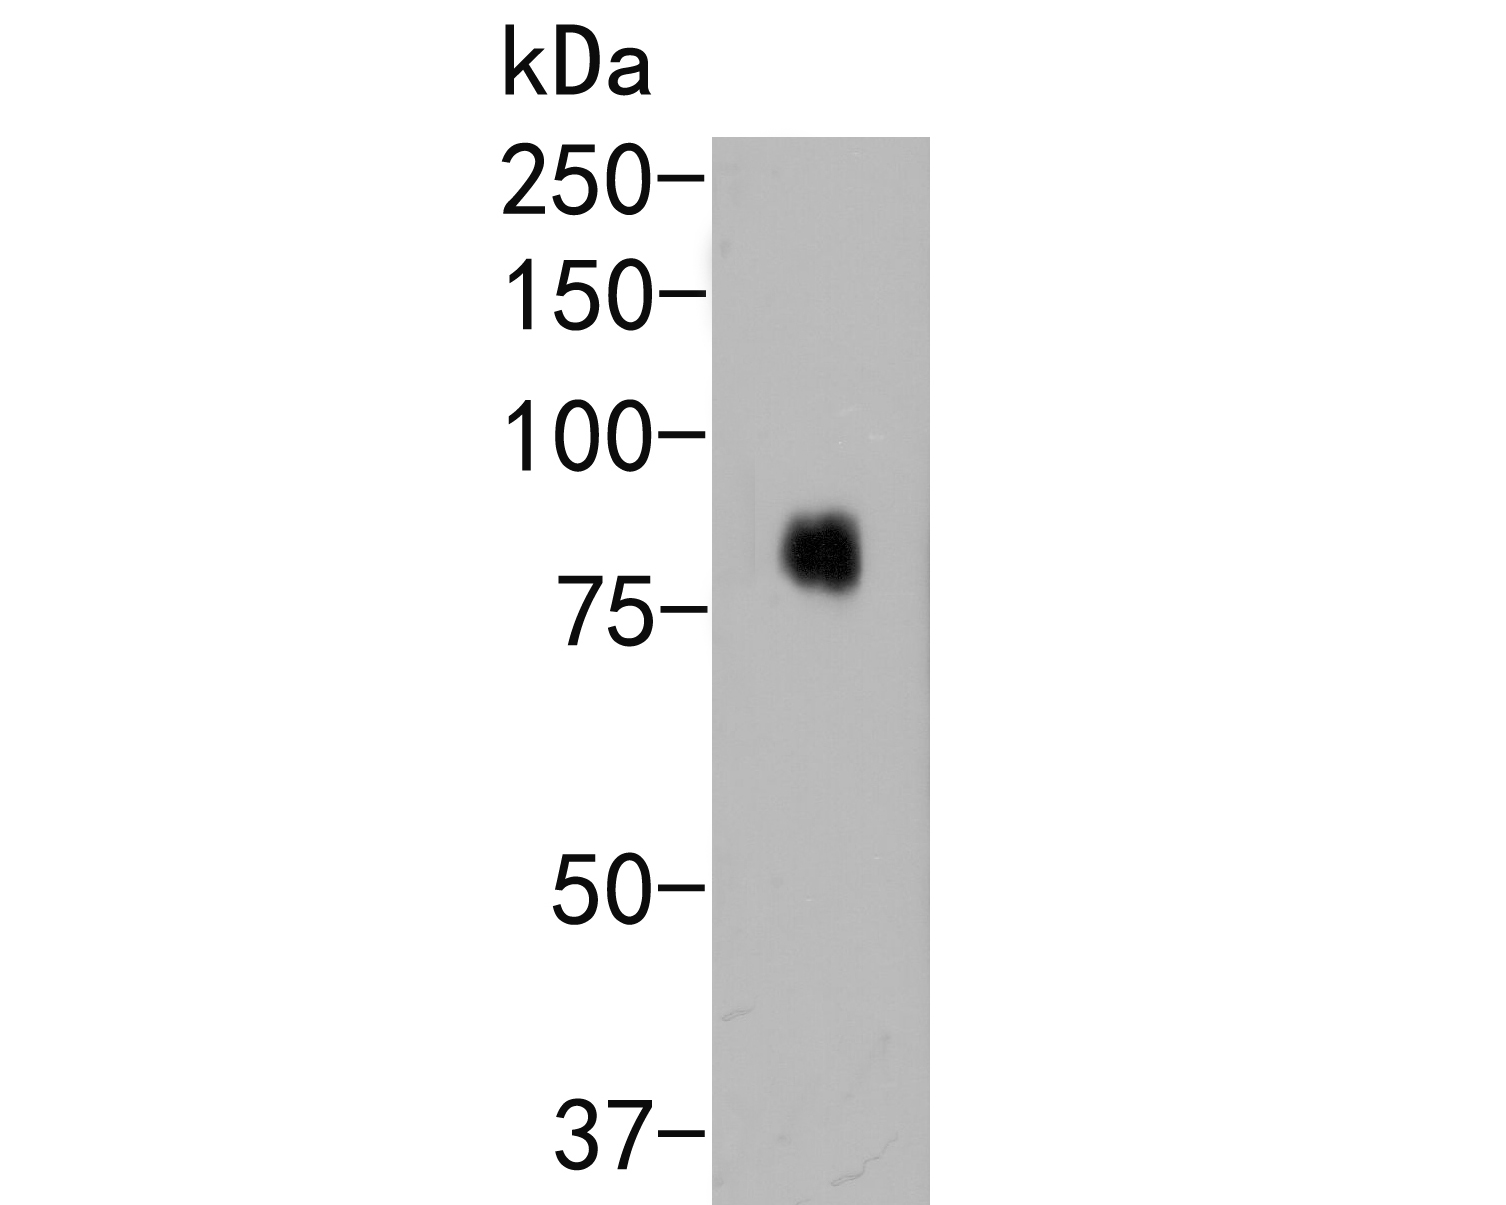 Western blot analysis of SIRP alpha on SW480 cell lysate. Proteins were transferred to a PVDF membrane and blocked with 5% BSA in PBS for 1 hour at room temperature. The primary antibody (EM1902-37, 1/500) was used in 5% BSA at room temperature for 2 hours. Goat Anti-Mouse IgG - HRP Secondary Antibody (HA1006) at 1:5,000 dilution was used for 1 hour at room temperature.